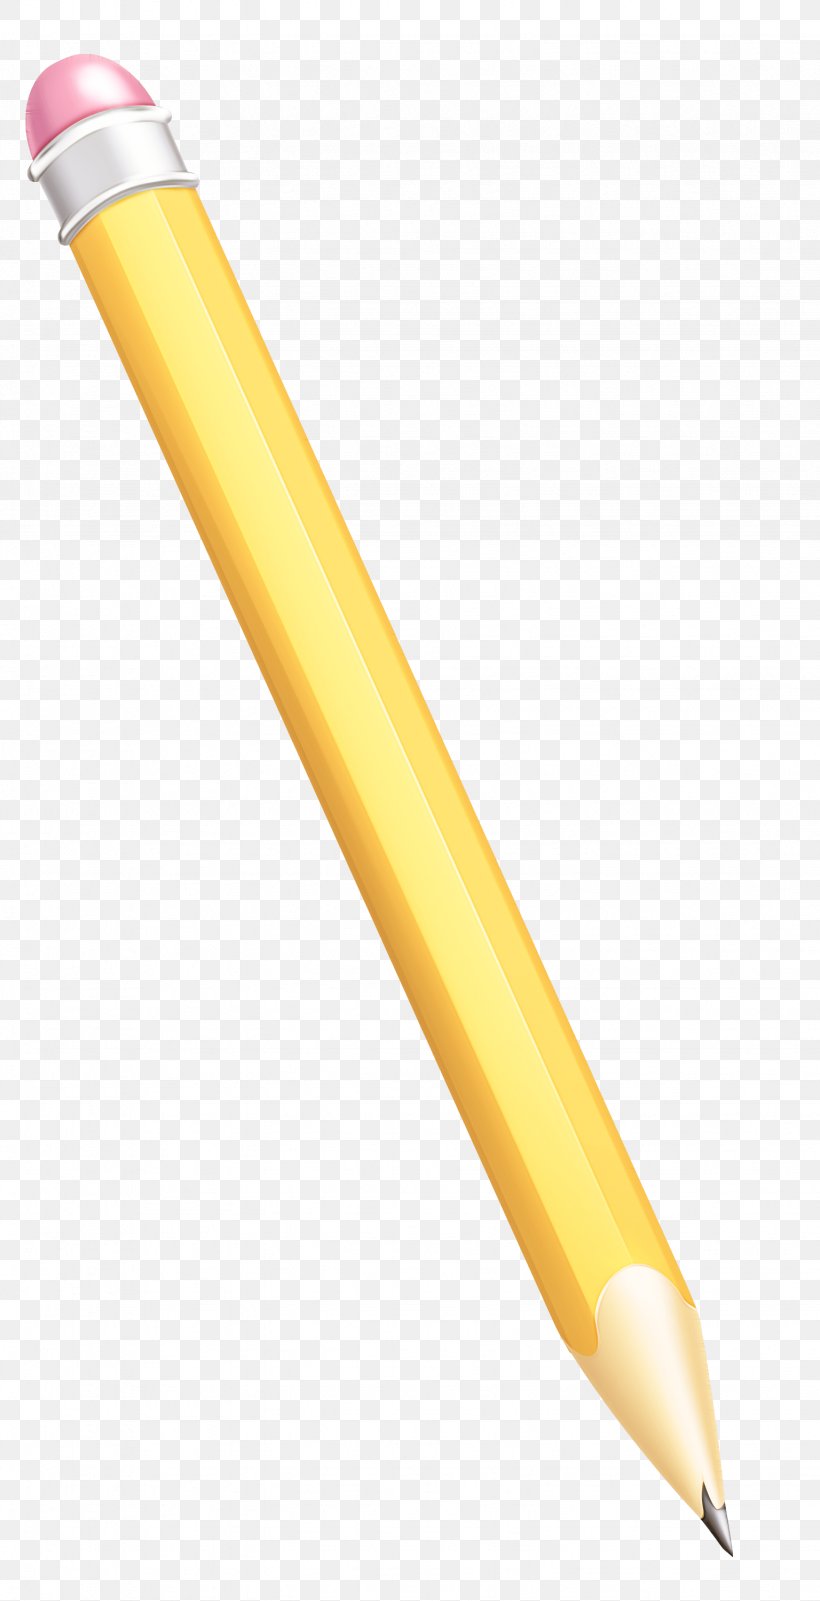 Yellow Musical Instrument Accessory Office Supplies, PNG, 1536x3000px, Yellow, Musical Instrument Accessory, Office Supplies Download Free